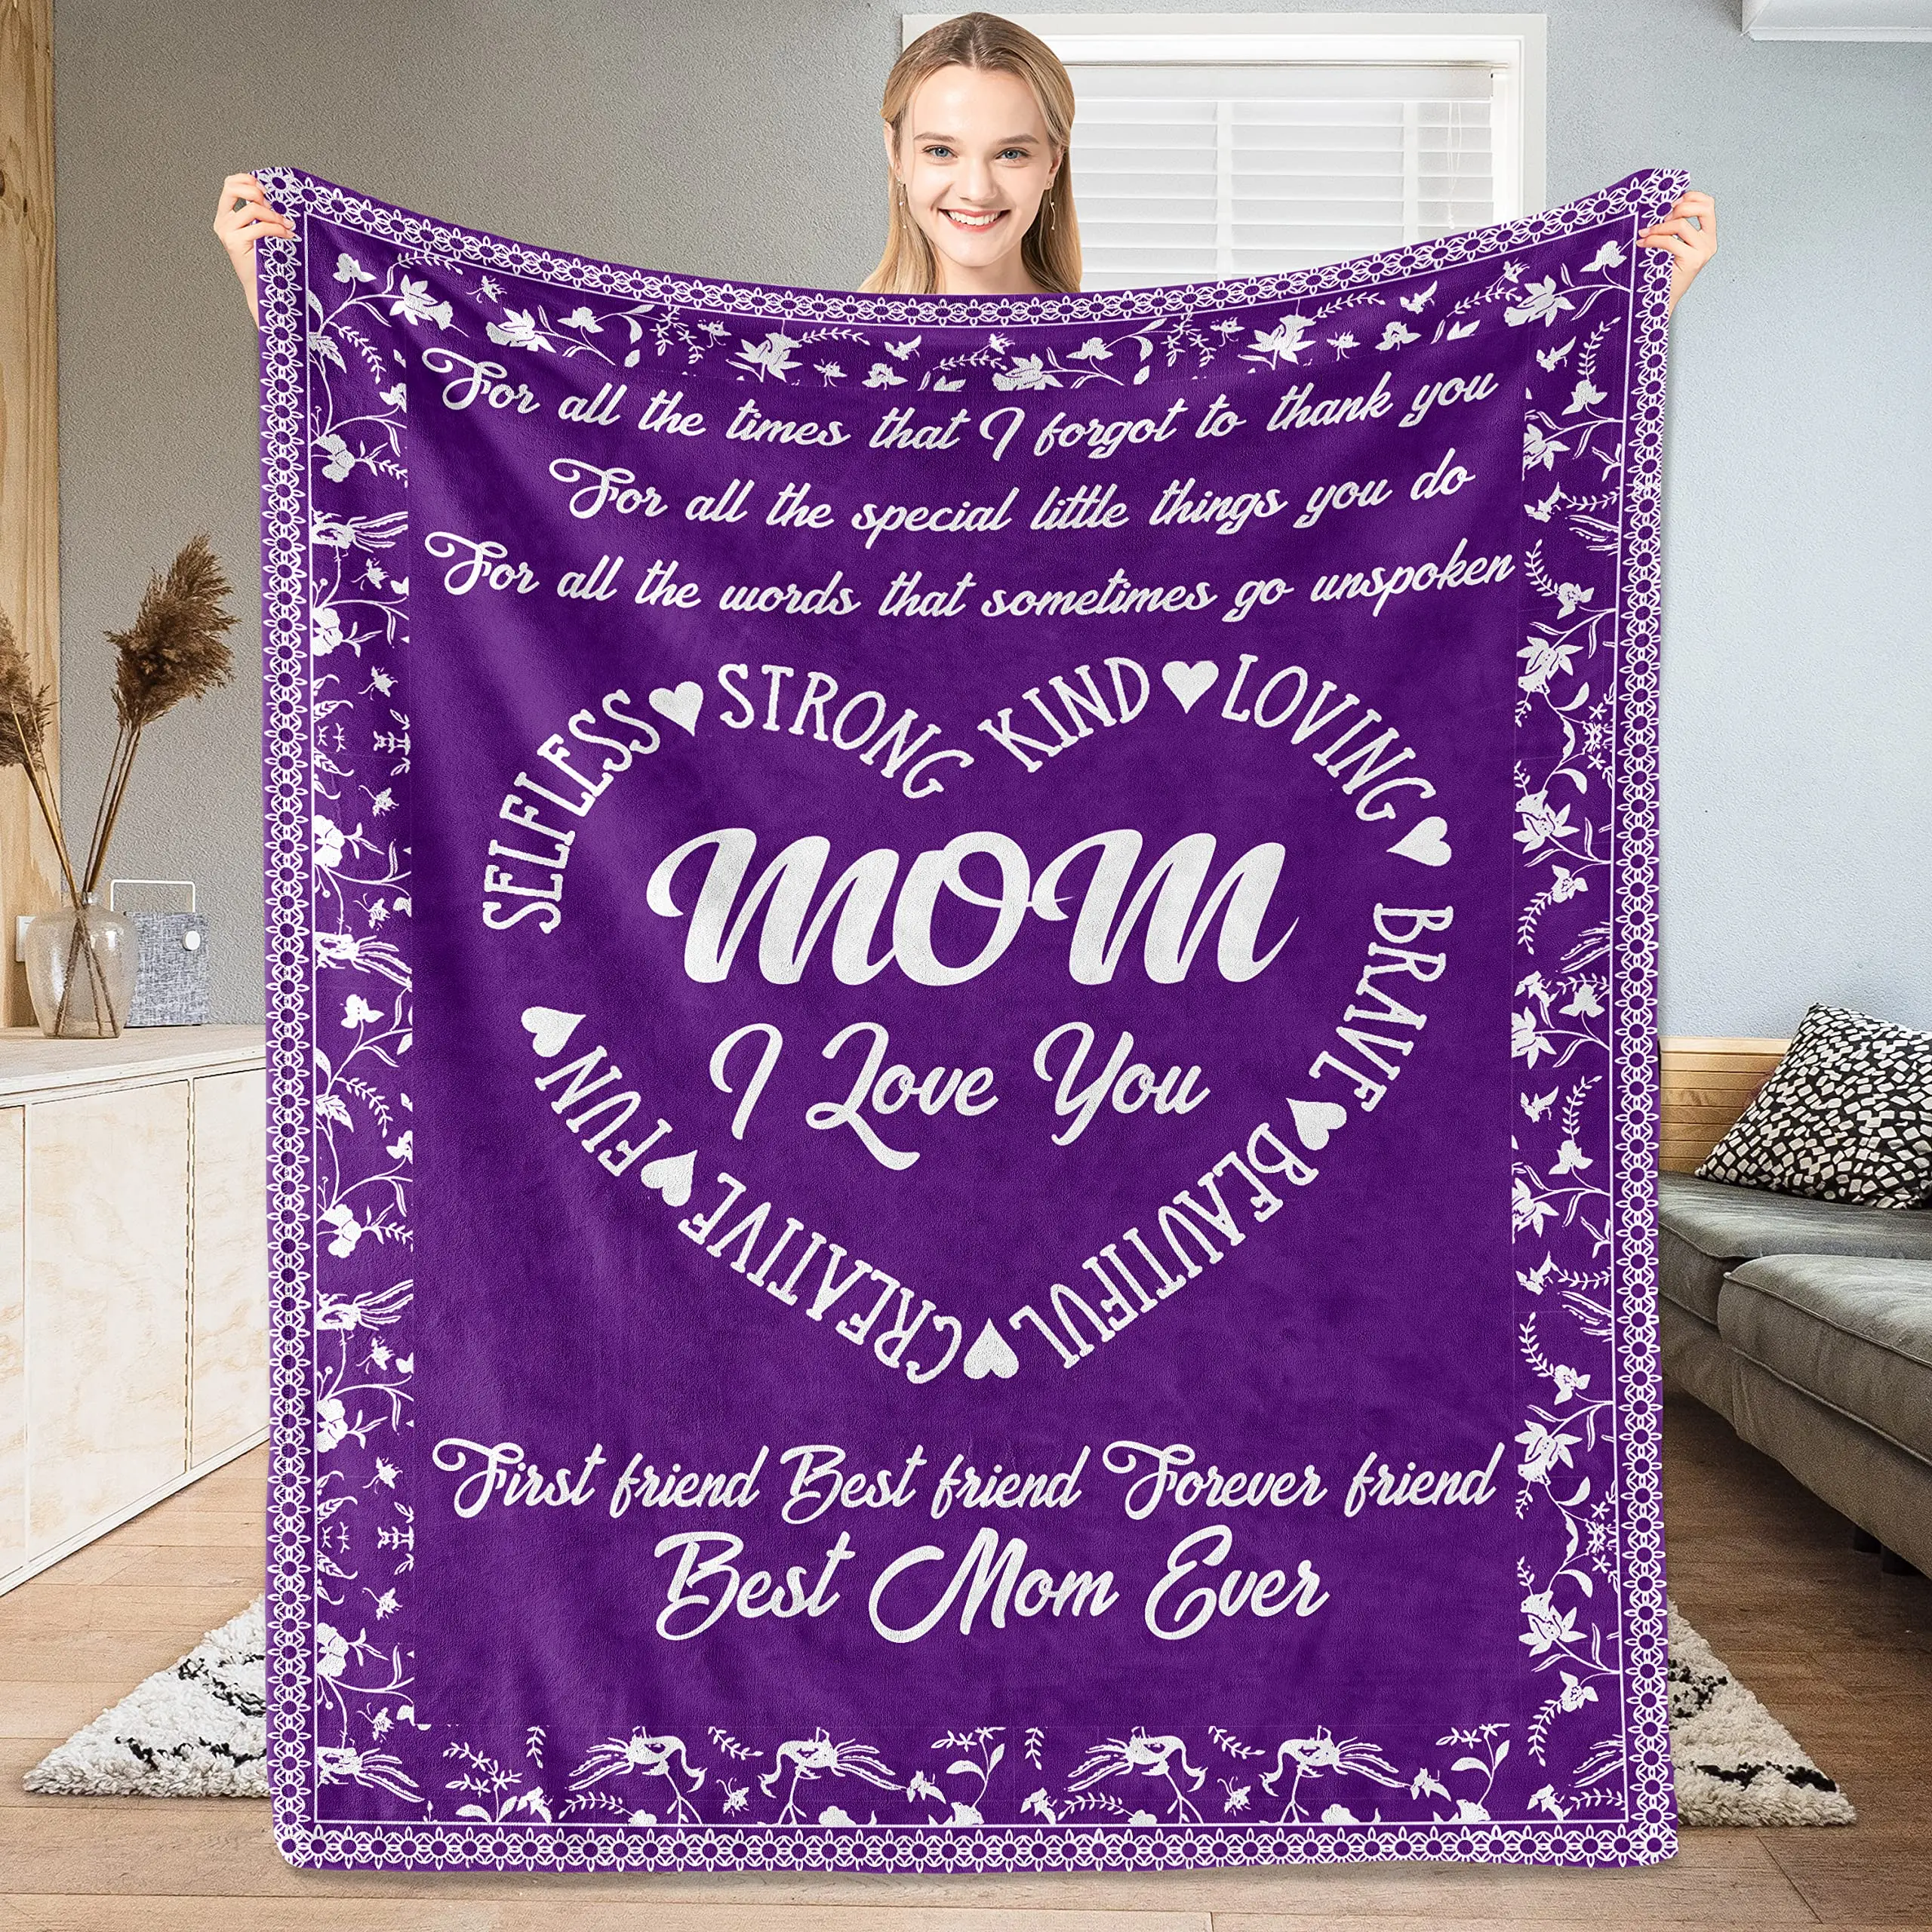 

Unique Fuzzy Fleece Blanket with Letter Warm Soft Gifts for Mom from Daughter/ Son Husband Presents for Mom Who Has Everything